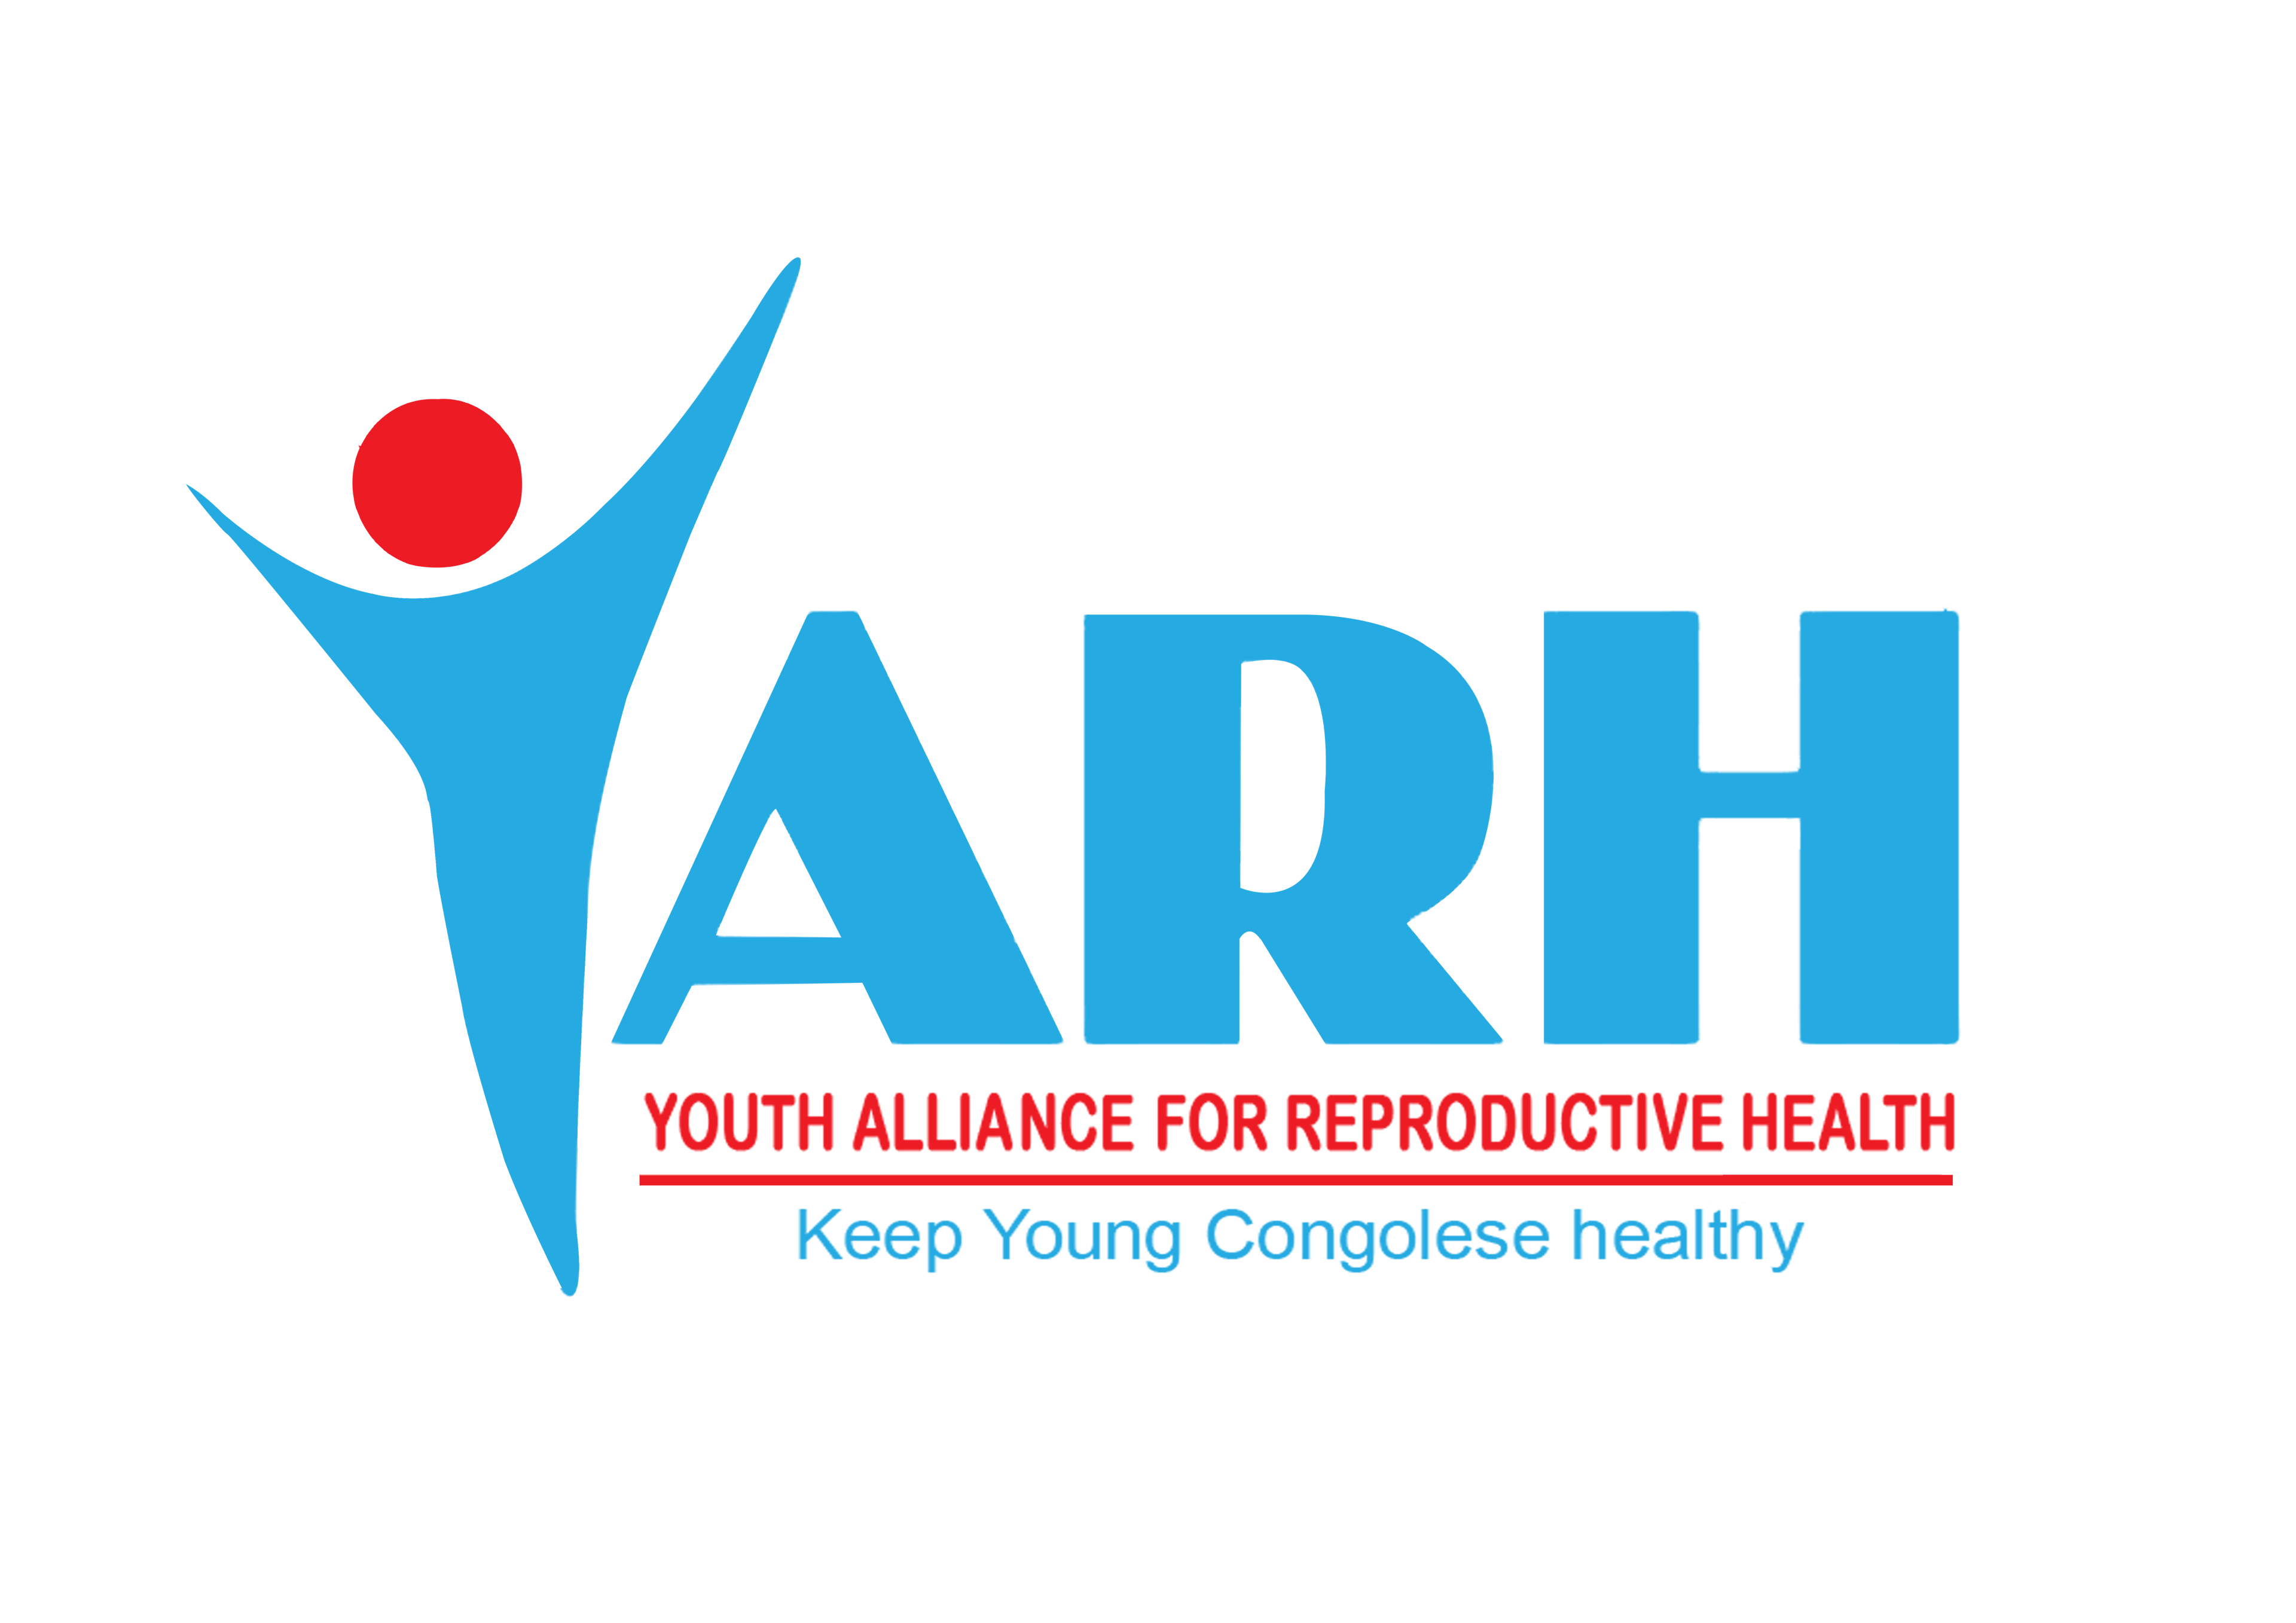 Youth Alliance for Reproductive Health